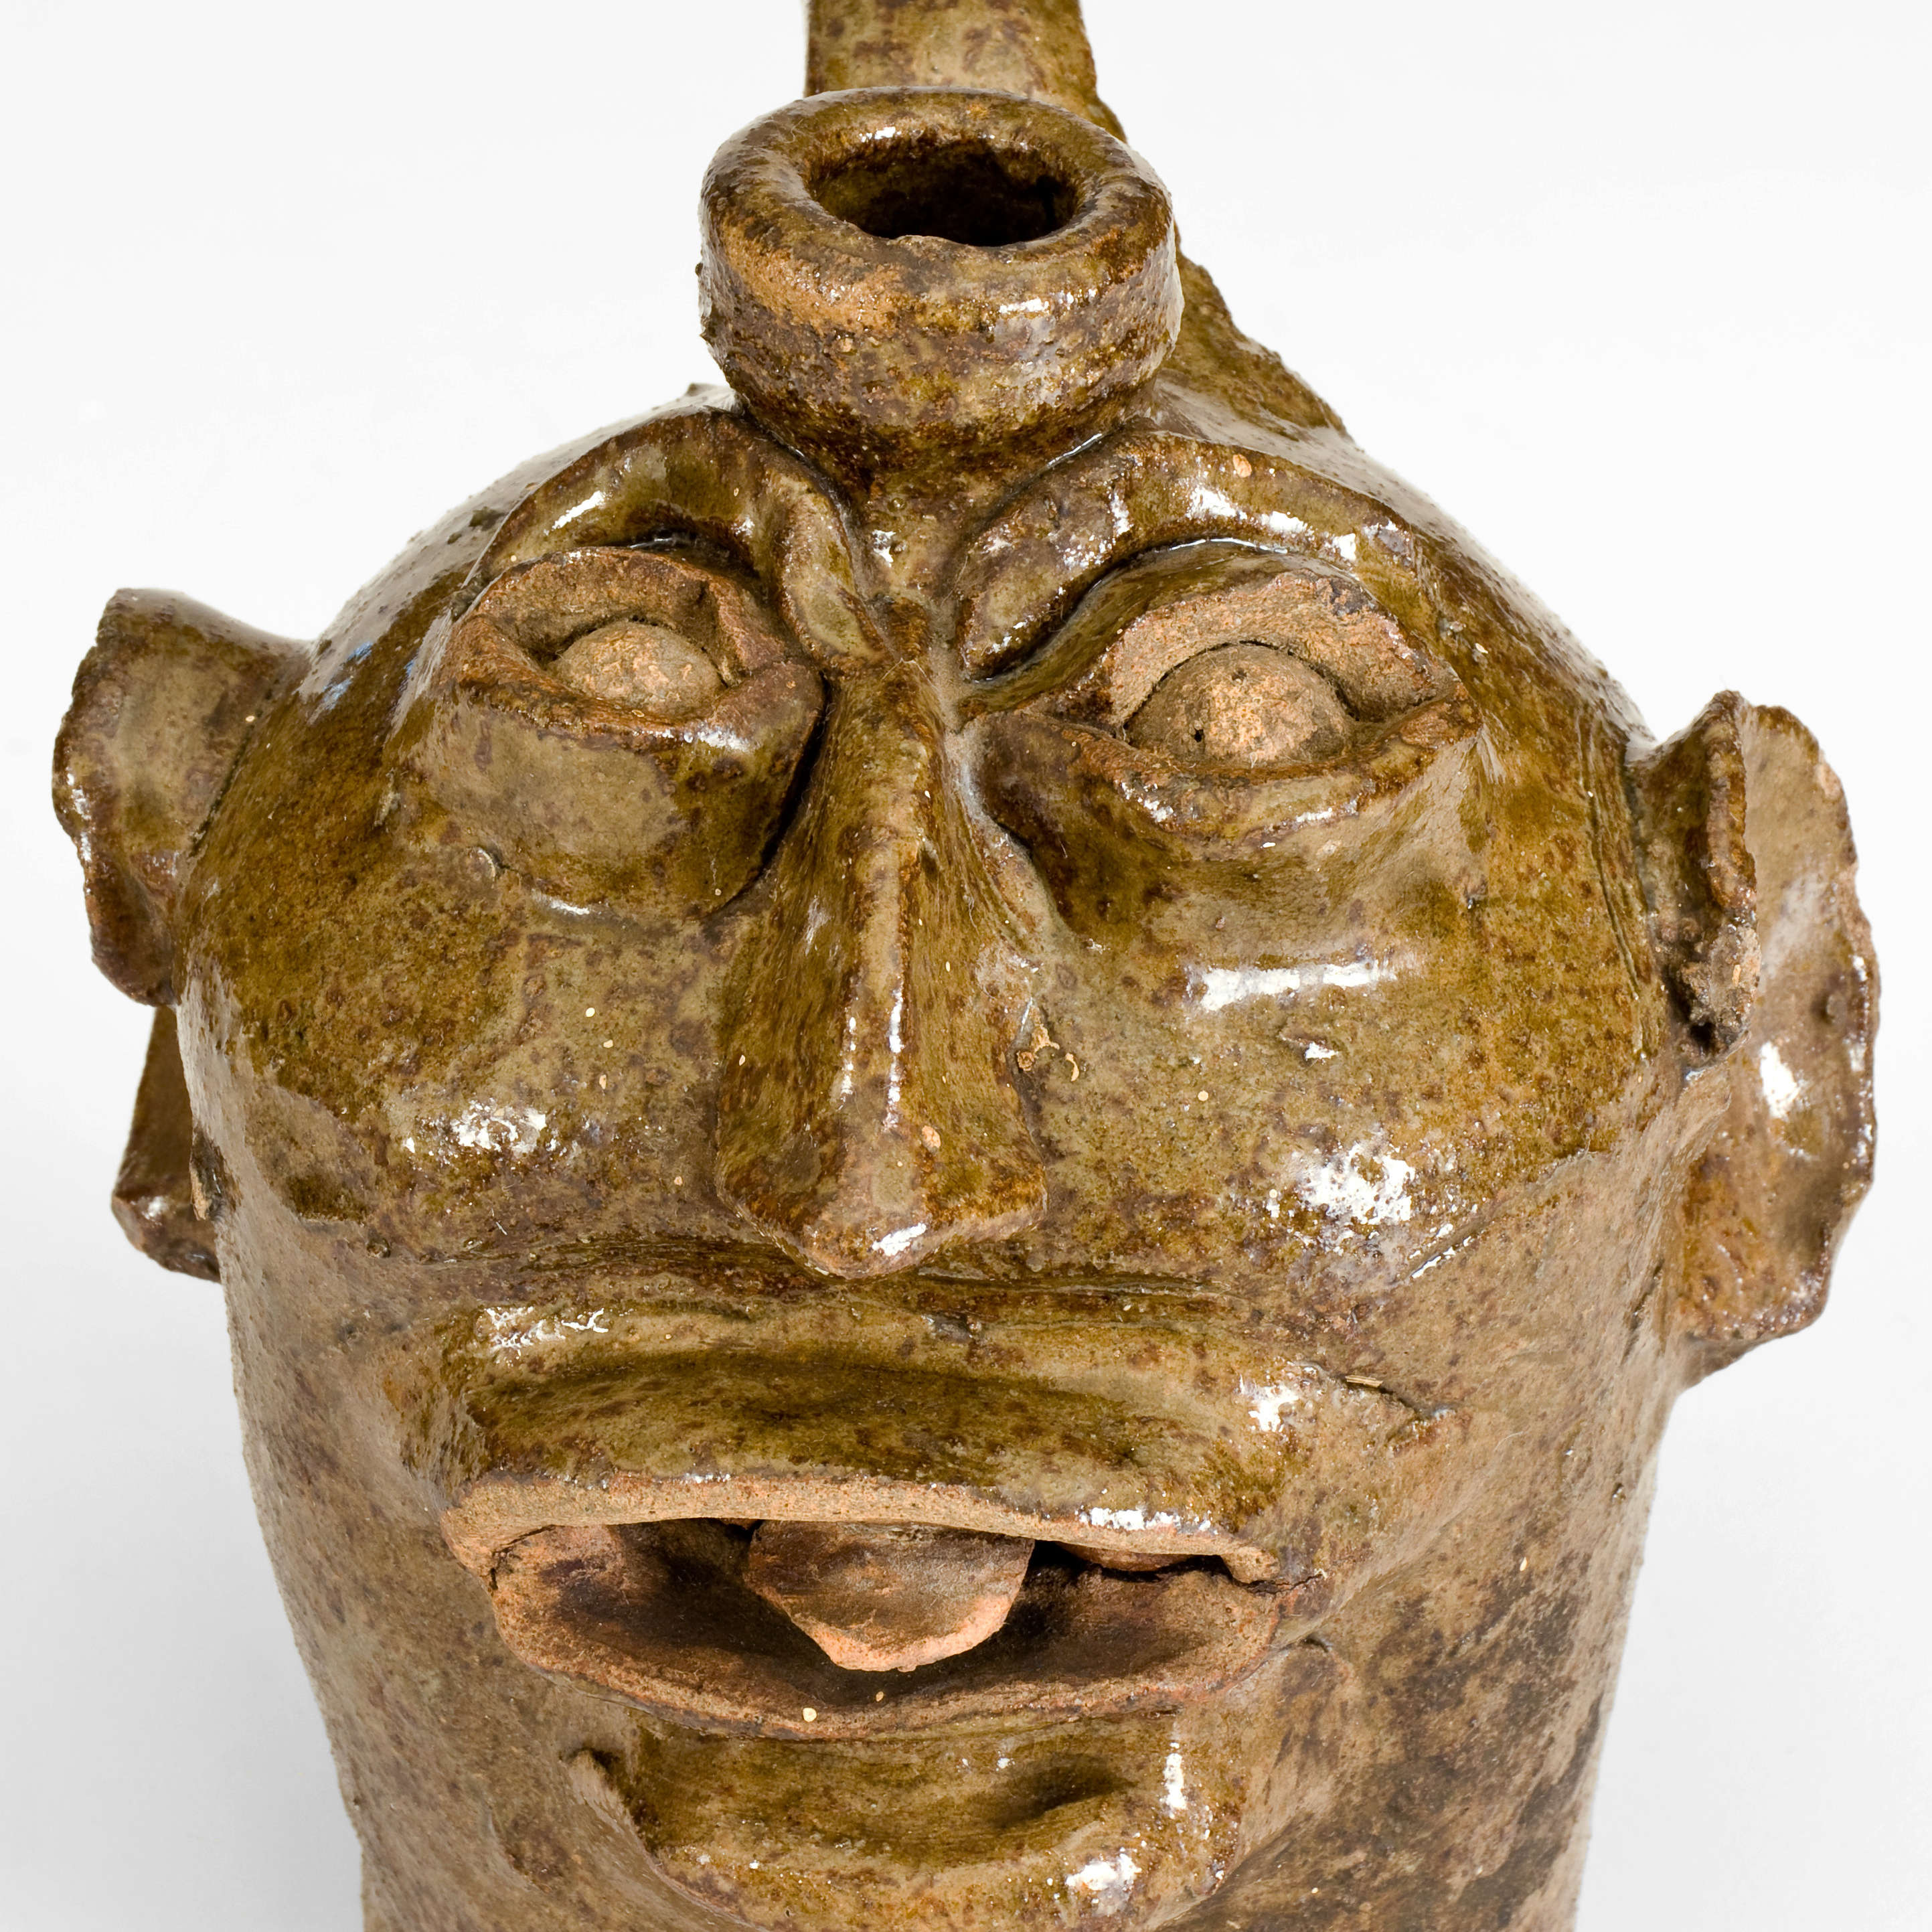 Stoneware Face Jug, Lewis Miles Stony Bluff Manufactory, Horse Creek Valley, Edgefield District, SC, c1855-1865